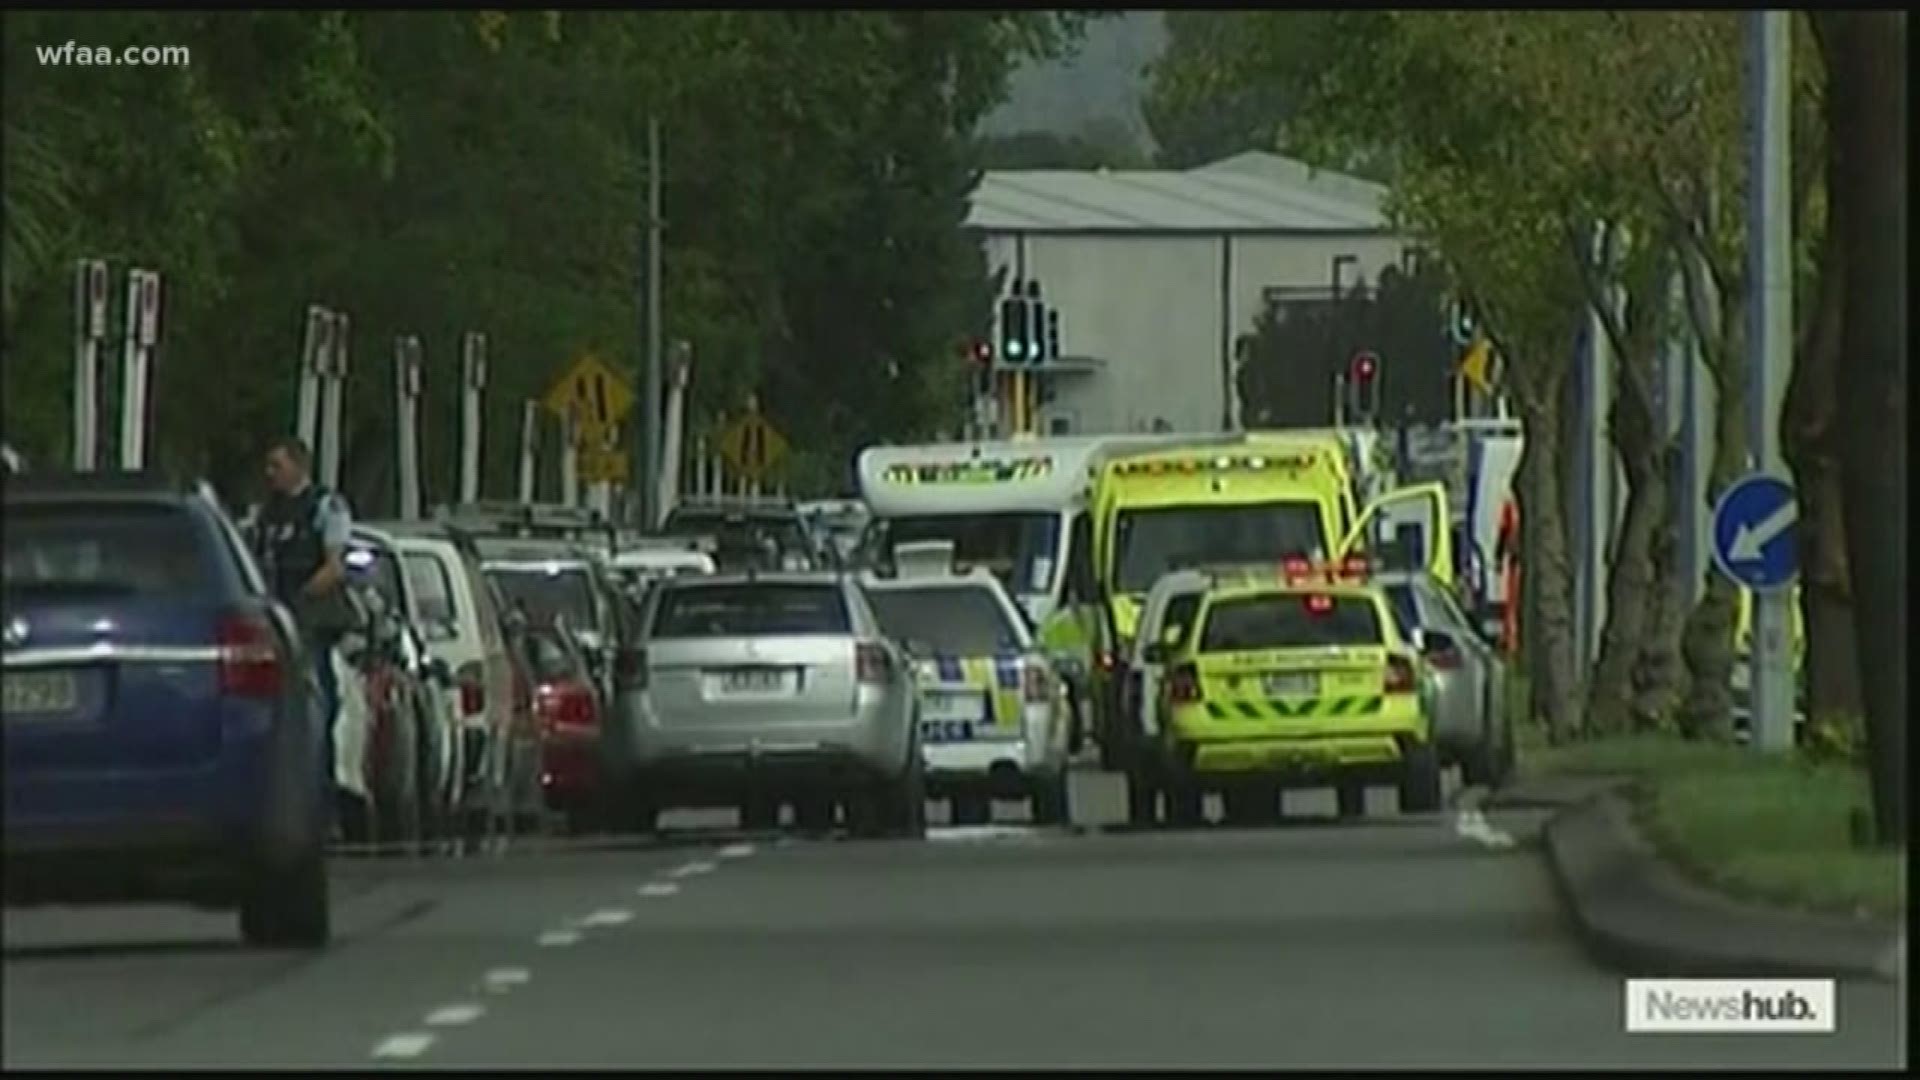 The shooting reportedly happened at a mosque in Christchurch.